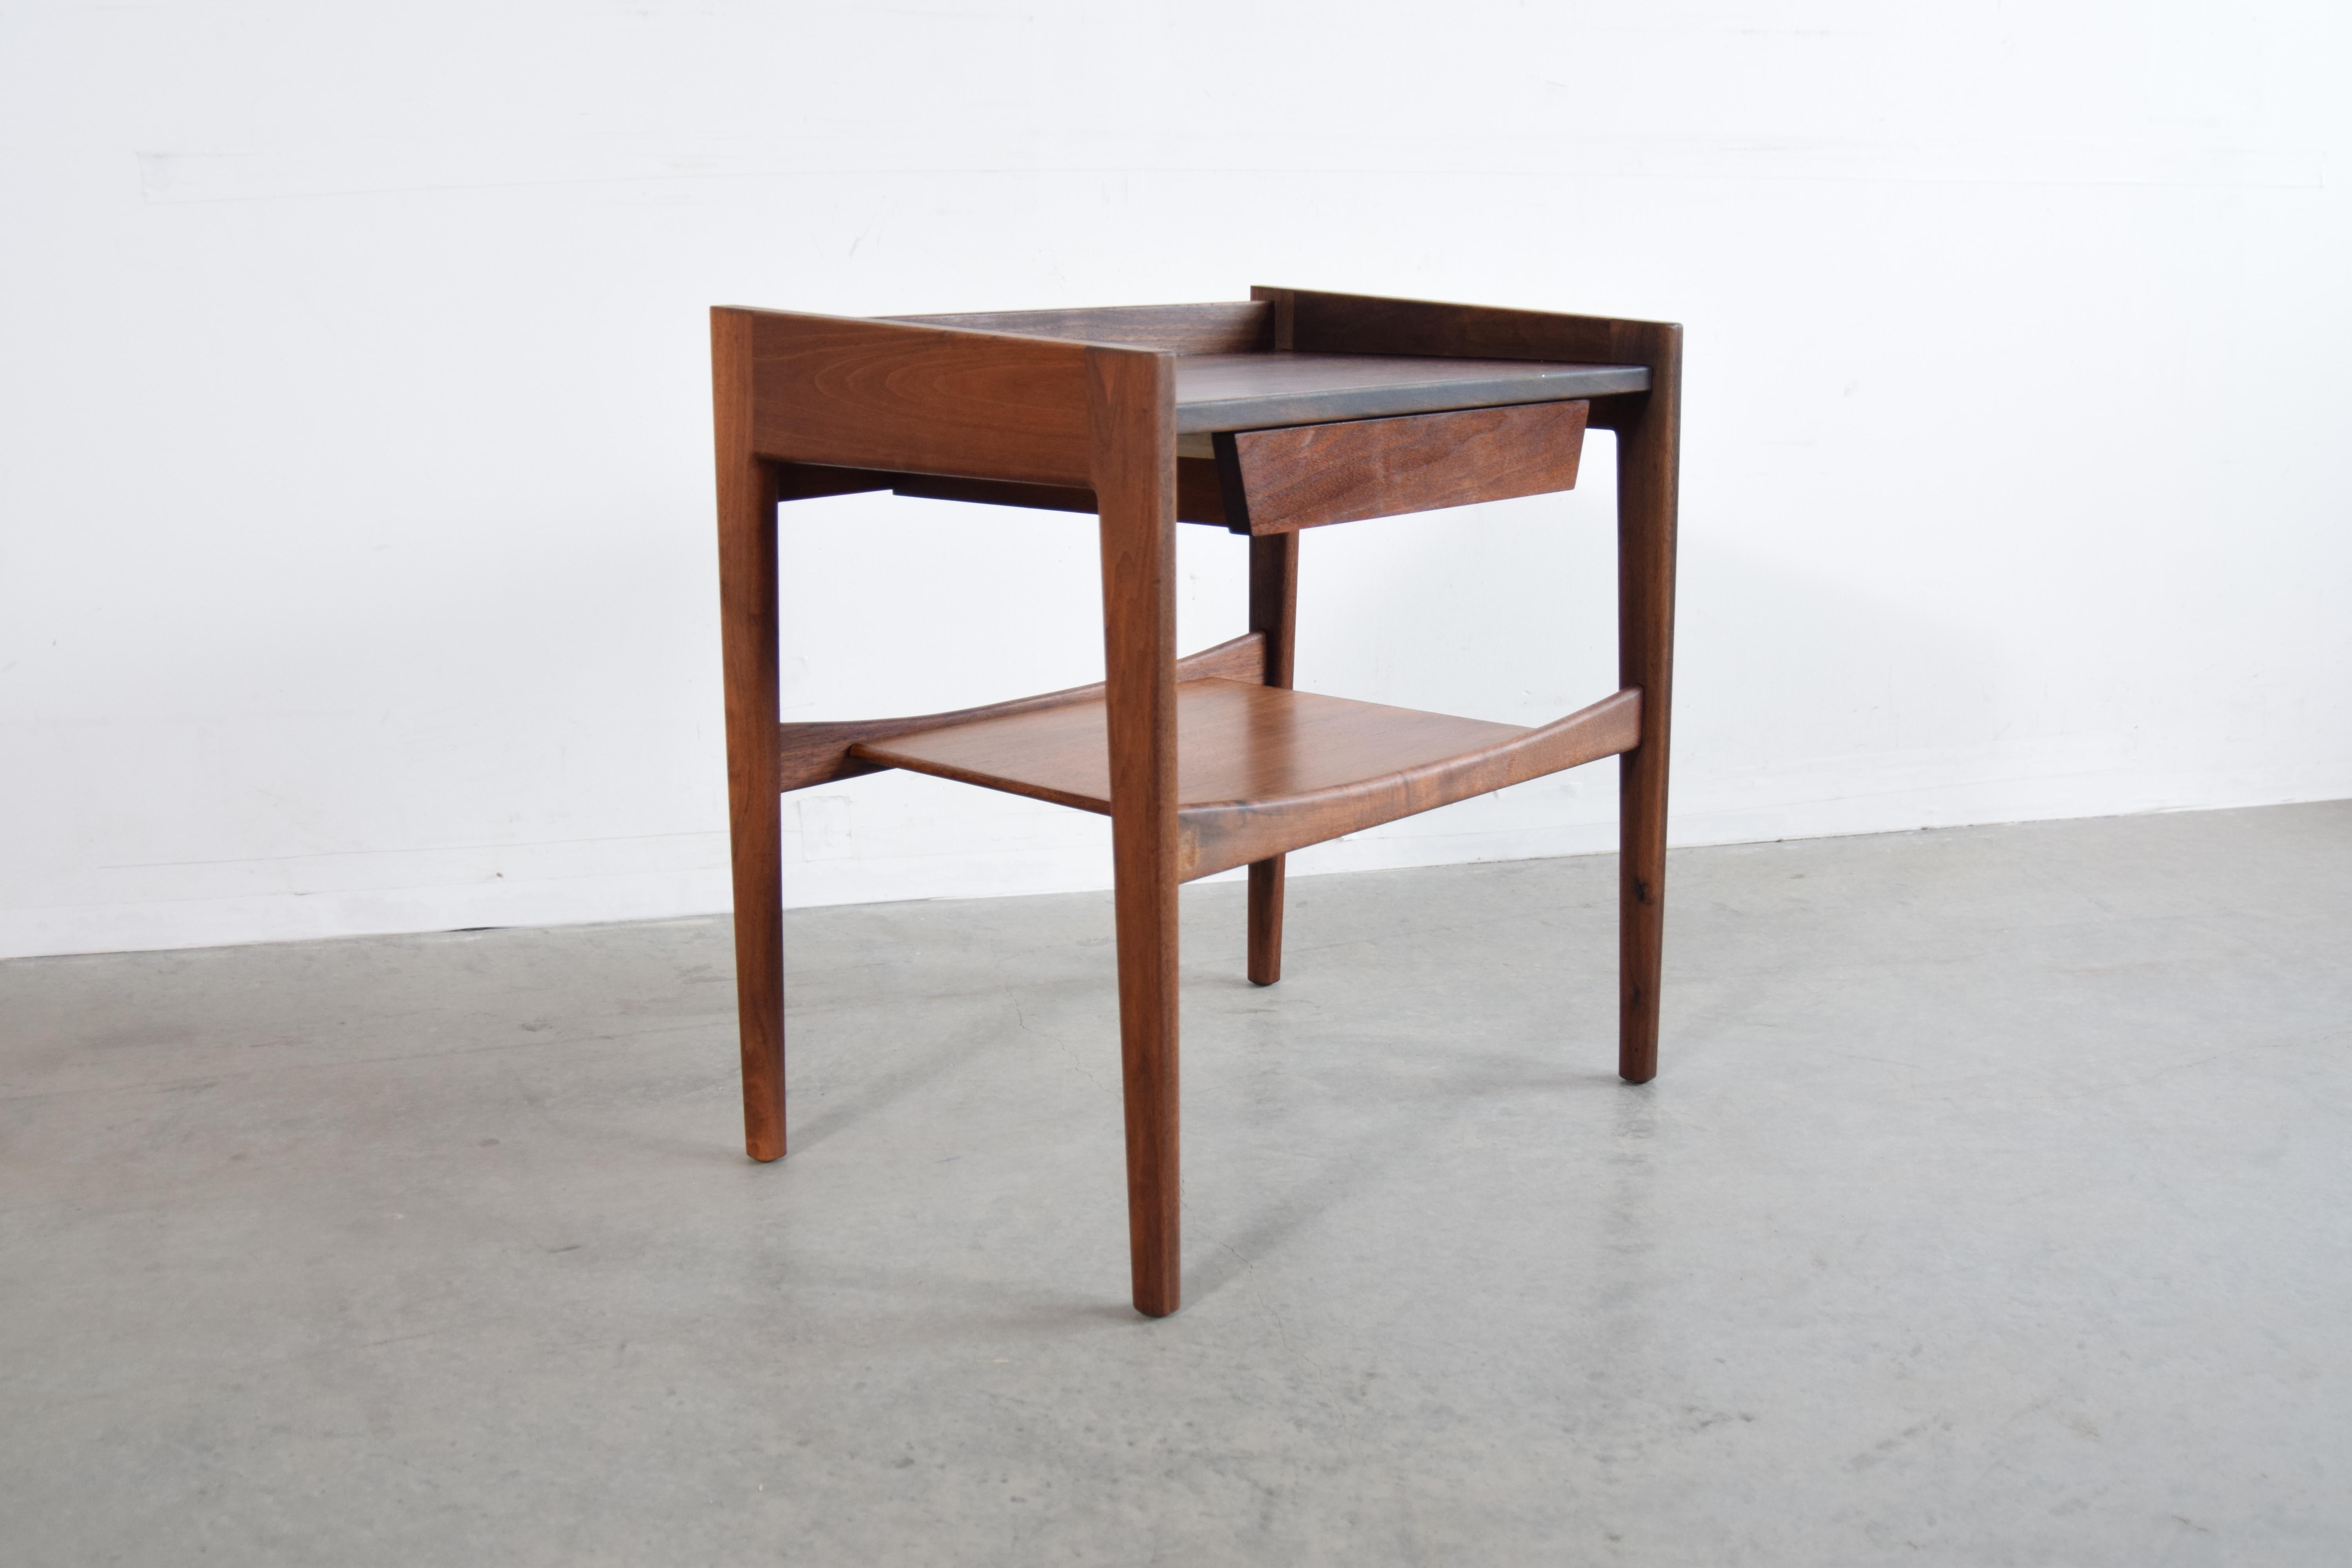 Night stand in walnut, circa 1968, designed and manufactured by Jens Risom (1916 - 2016). Stand has one drawer, and one lower shelf. This piece could also be used as an end table.

Jens Risom was a Danish American furniture designer. An exemplar of